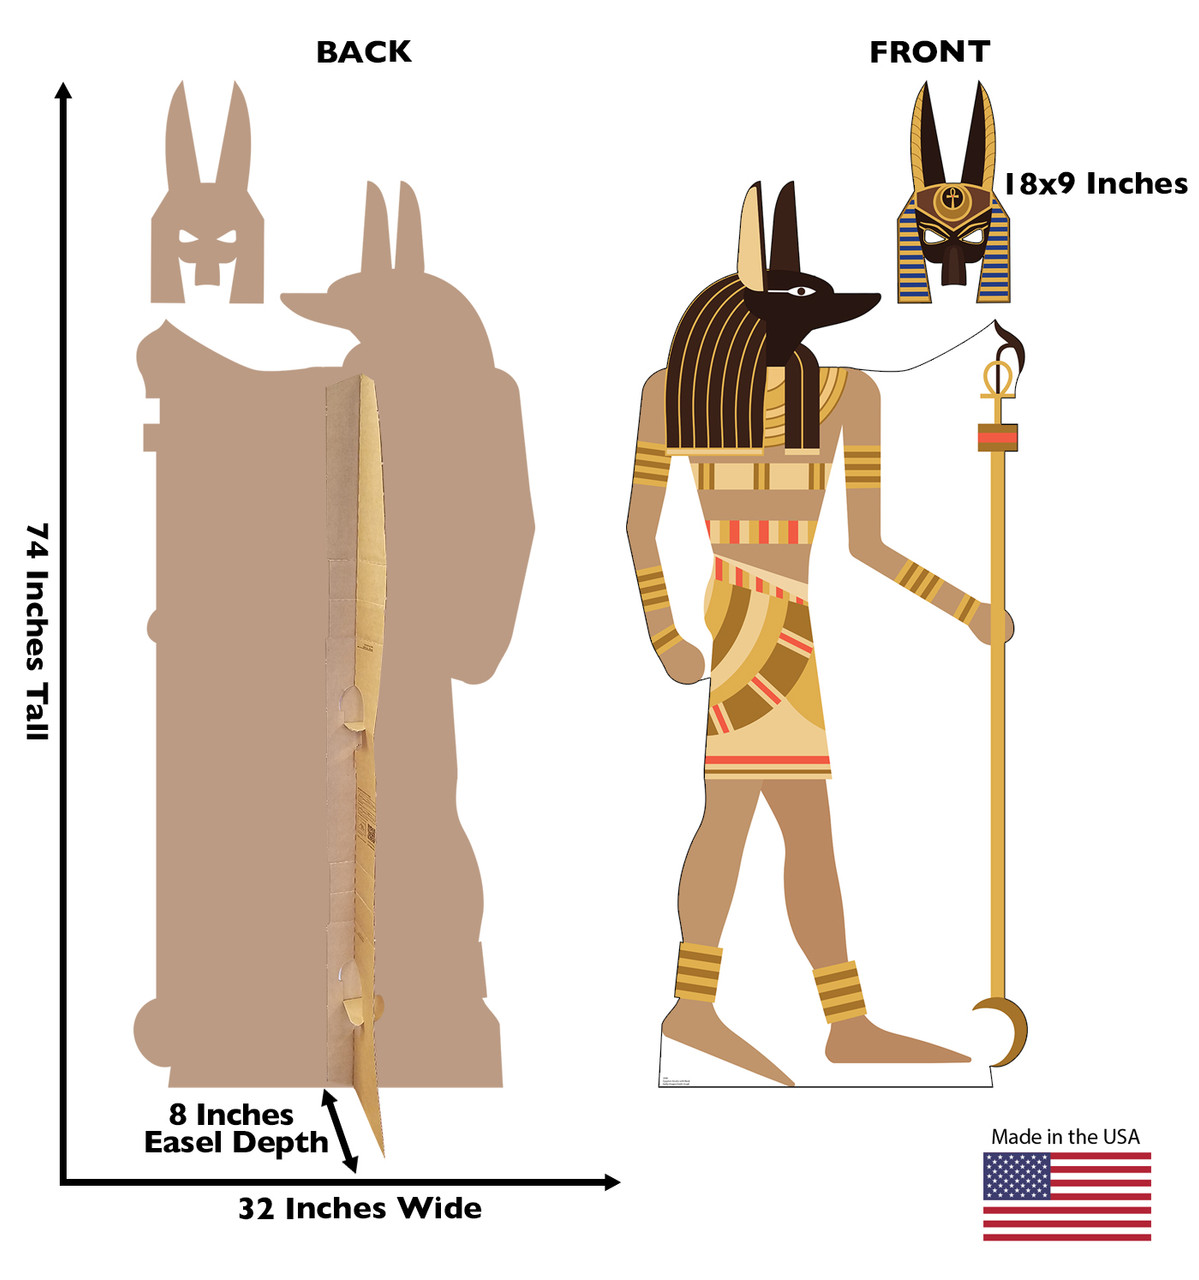 Life-size cardboard standee of Egyptian Anubis with Mask with back and front dimensions.